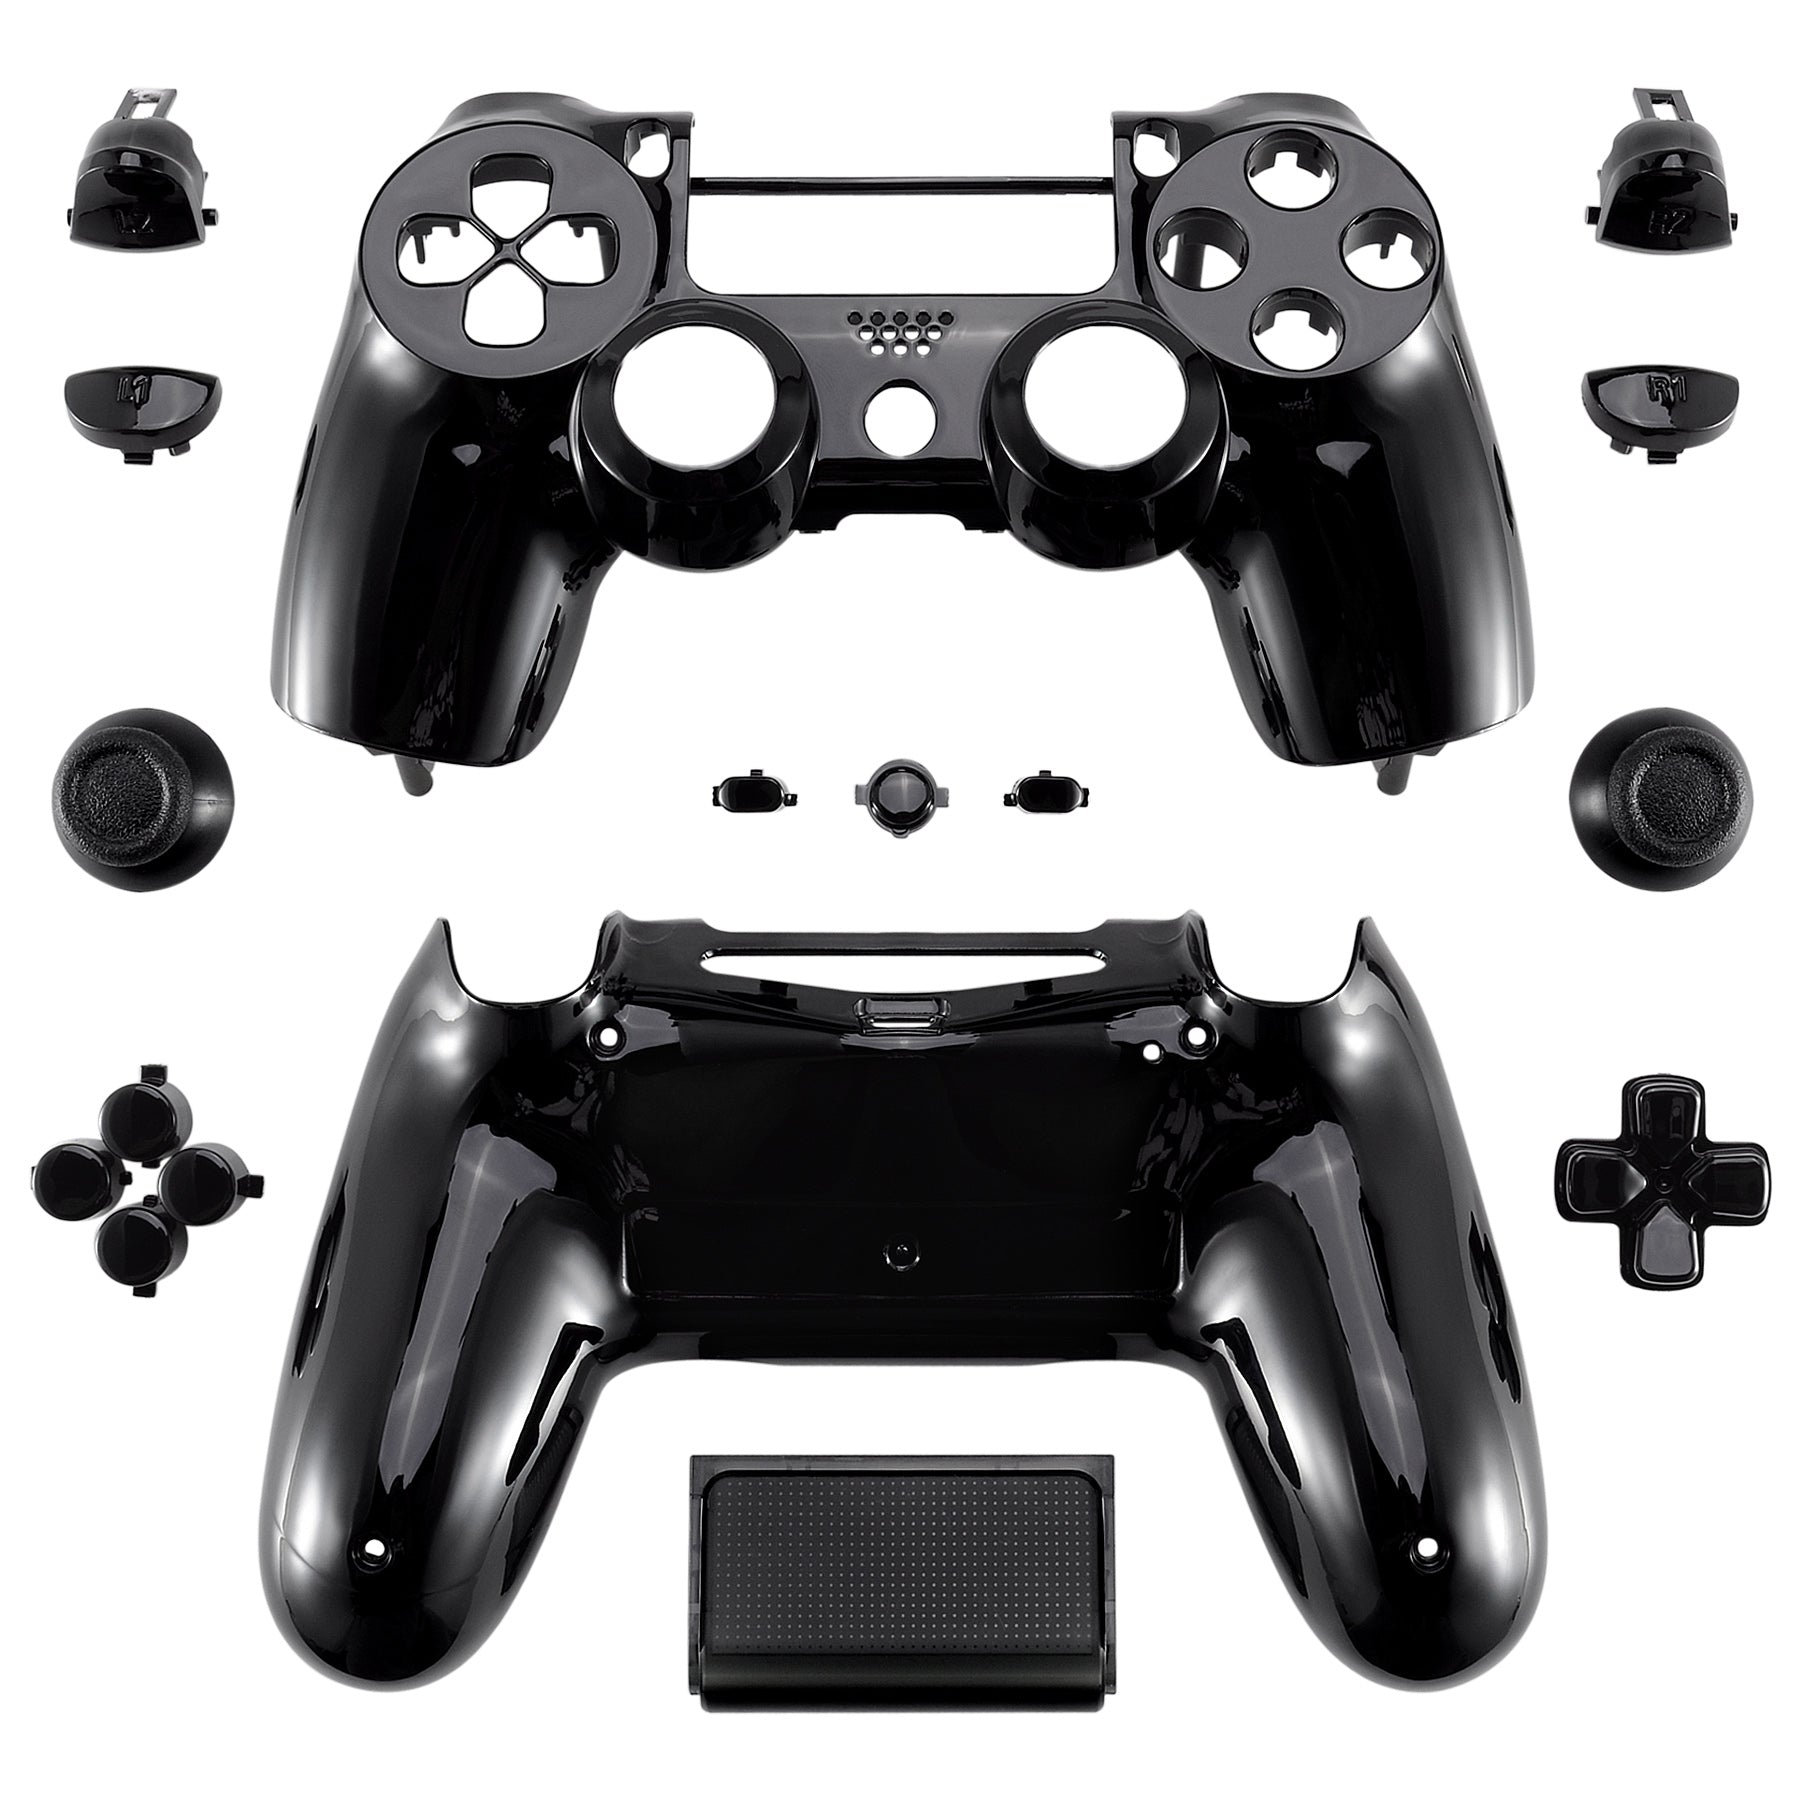 Replacement Full Set Houaing Shell Facaplate Buttons for ps4 Slim ps4 Pro Controller (CUH-ZCT2 JDM-040 JDM-050 JDM-055) - Black eXtremeRate